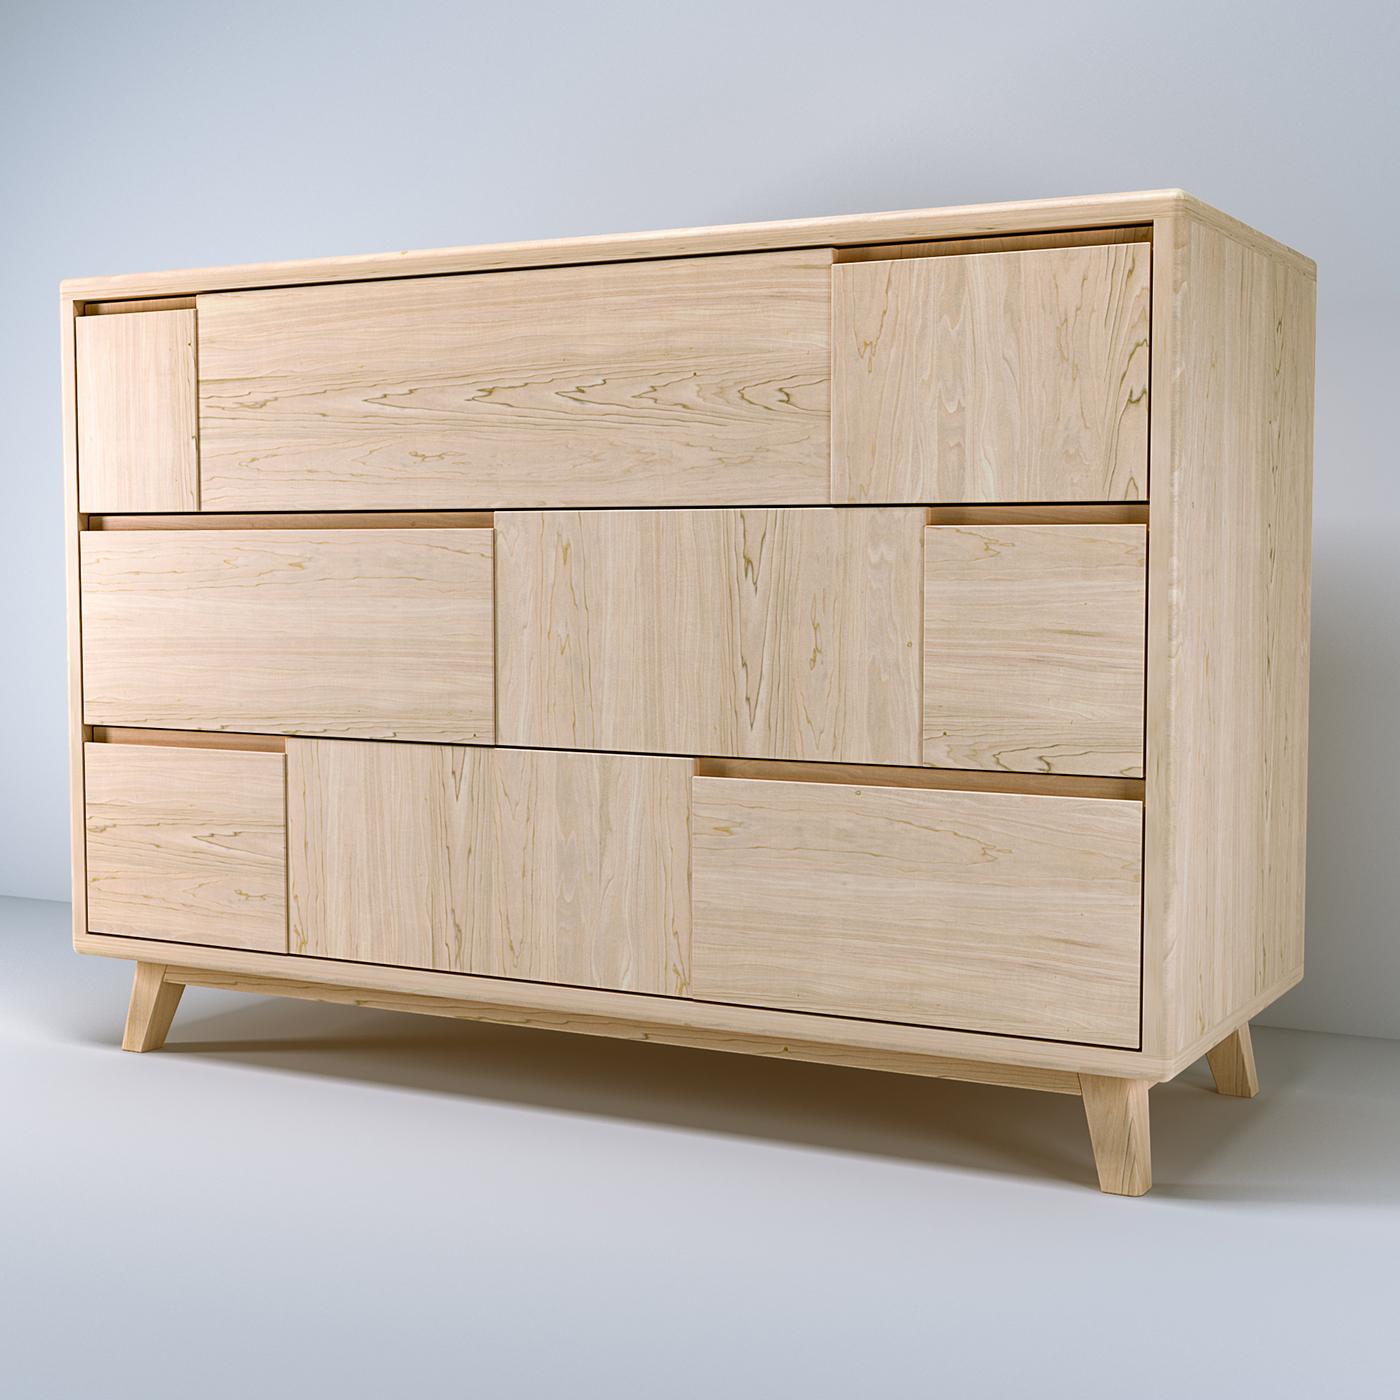 Boasting a linear design and an impeccable construction, this dresser brings Scandinavian-style elegance to any home. The sober and elegant structure is handcrafted of solid maple wood with a natural finish and a matte satin effect obtained with a